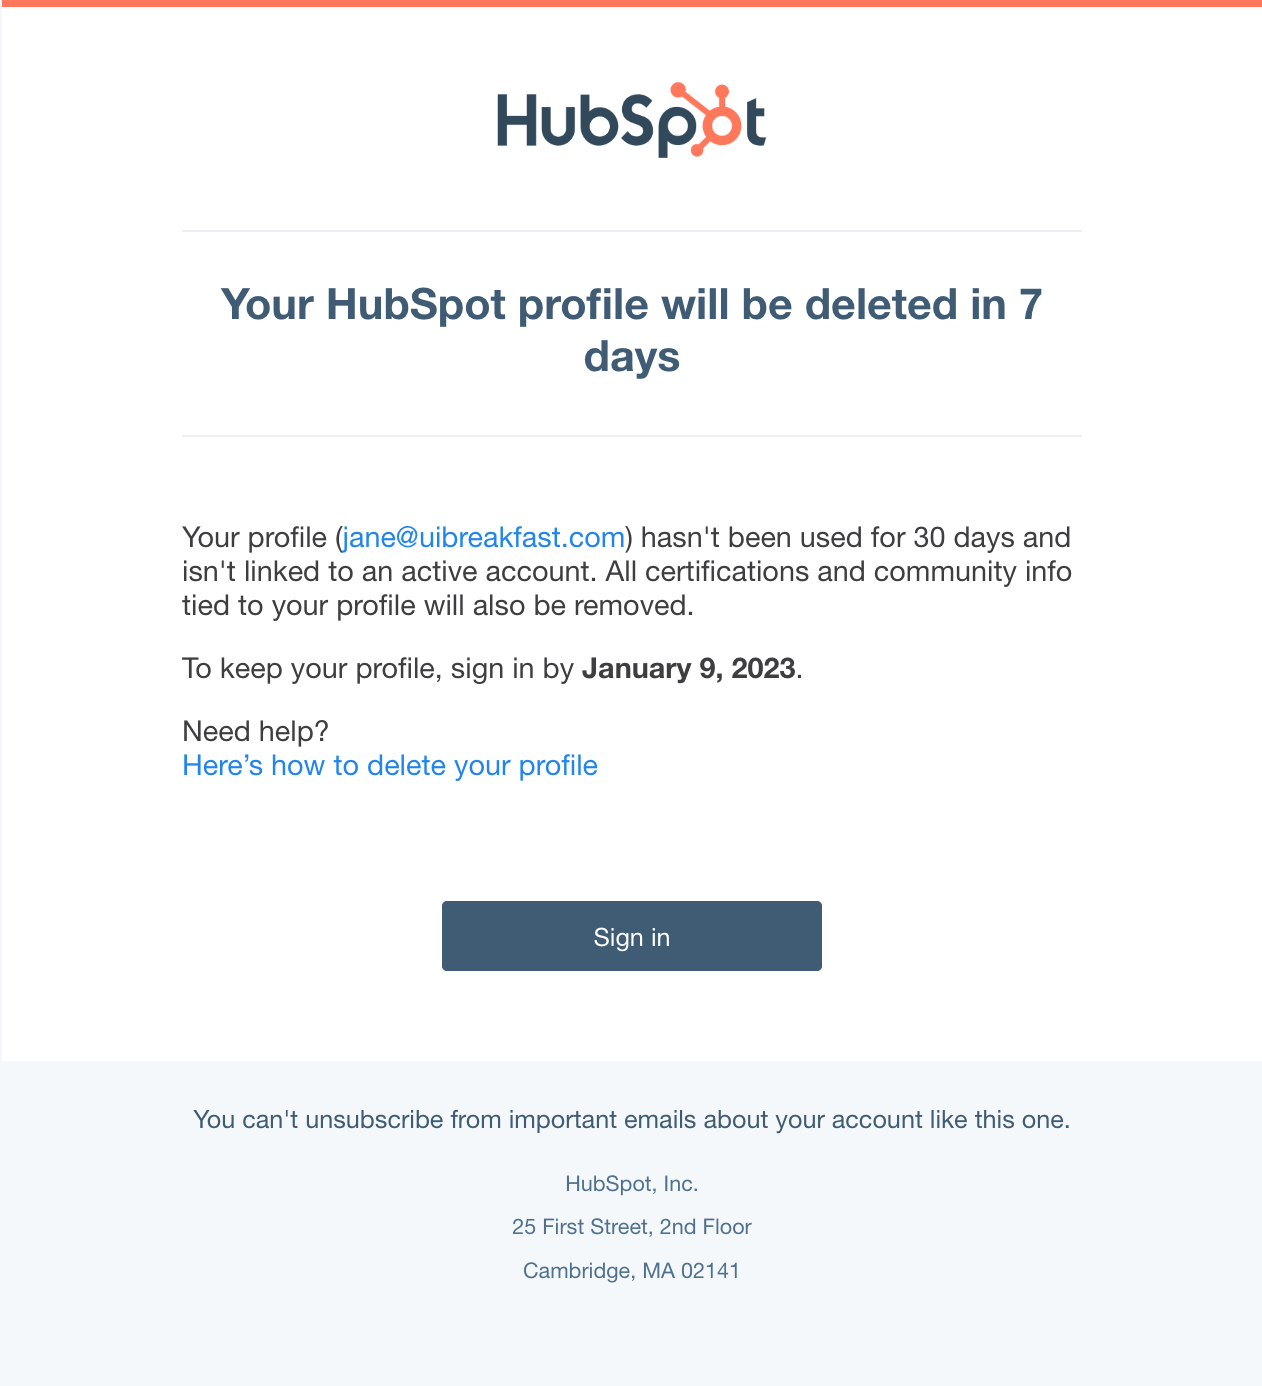 Account Removal Emails: Screenshot of HubSpot's 7-day account deactivation notification email to users